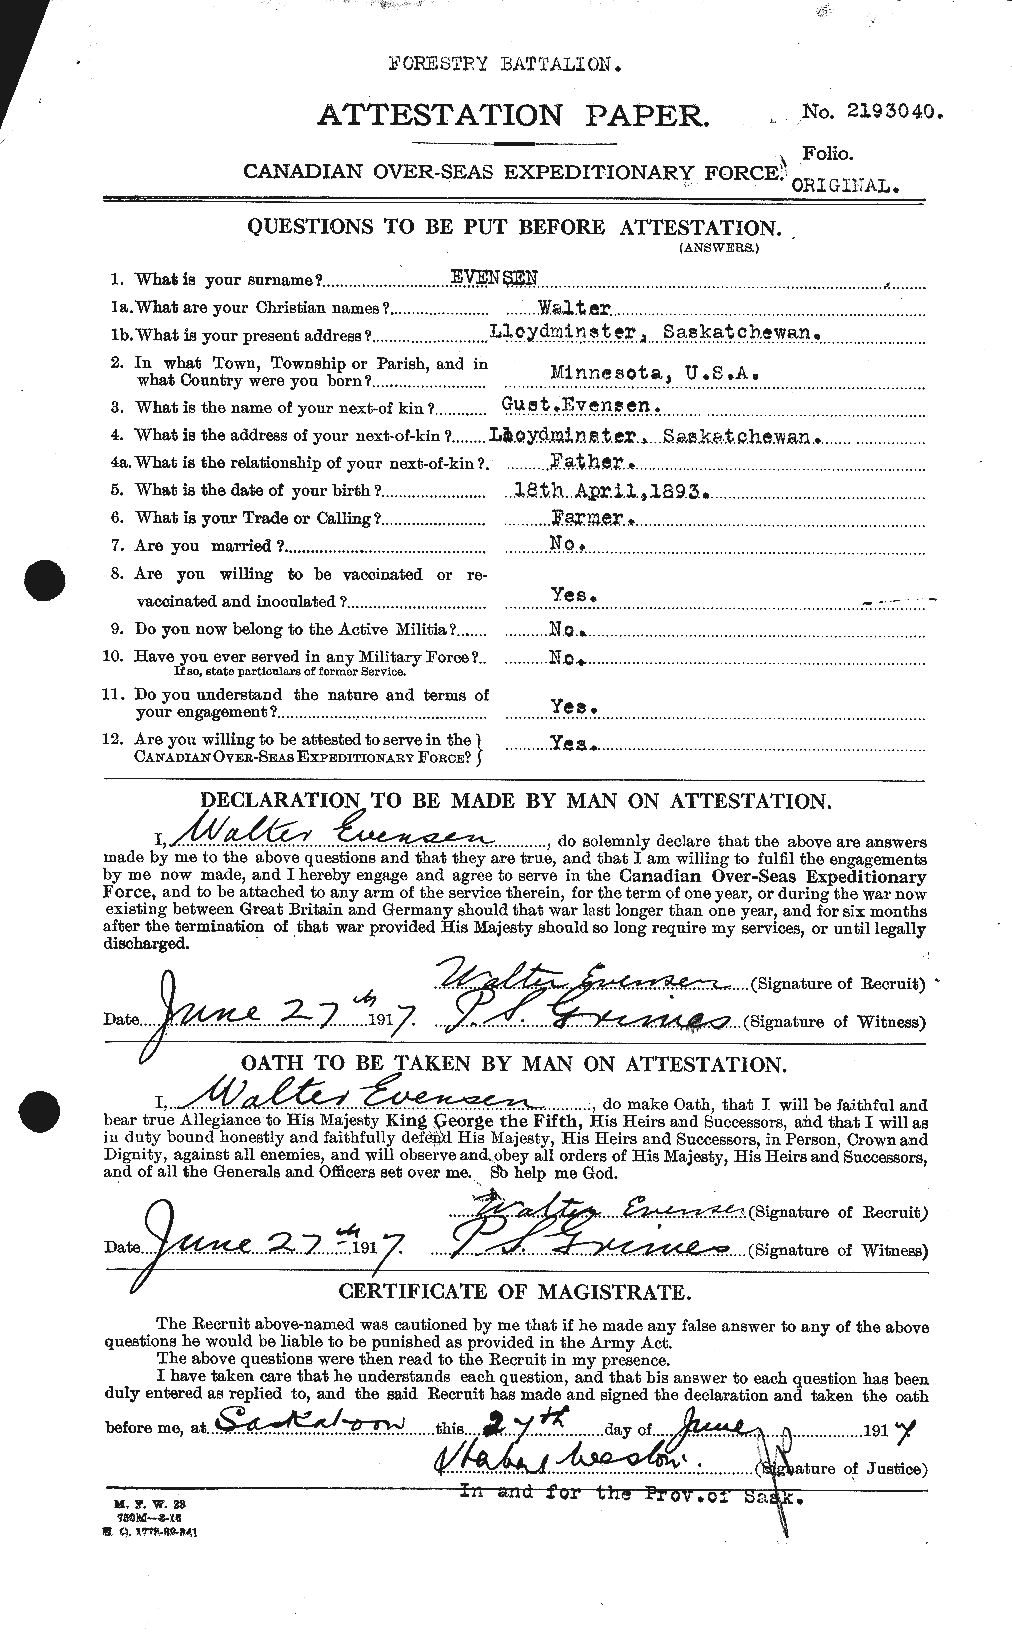 Personnel Records of the First World War - CEF 315741a